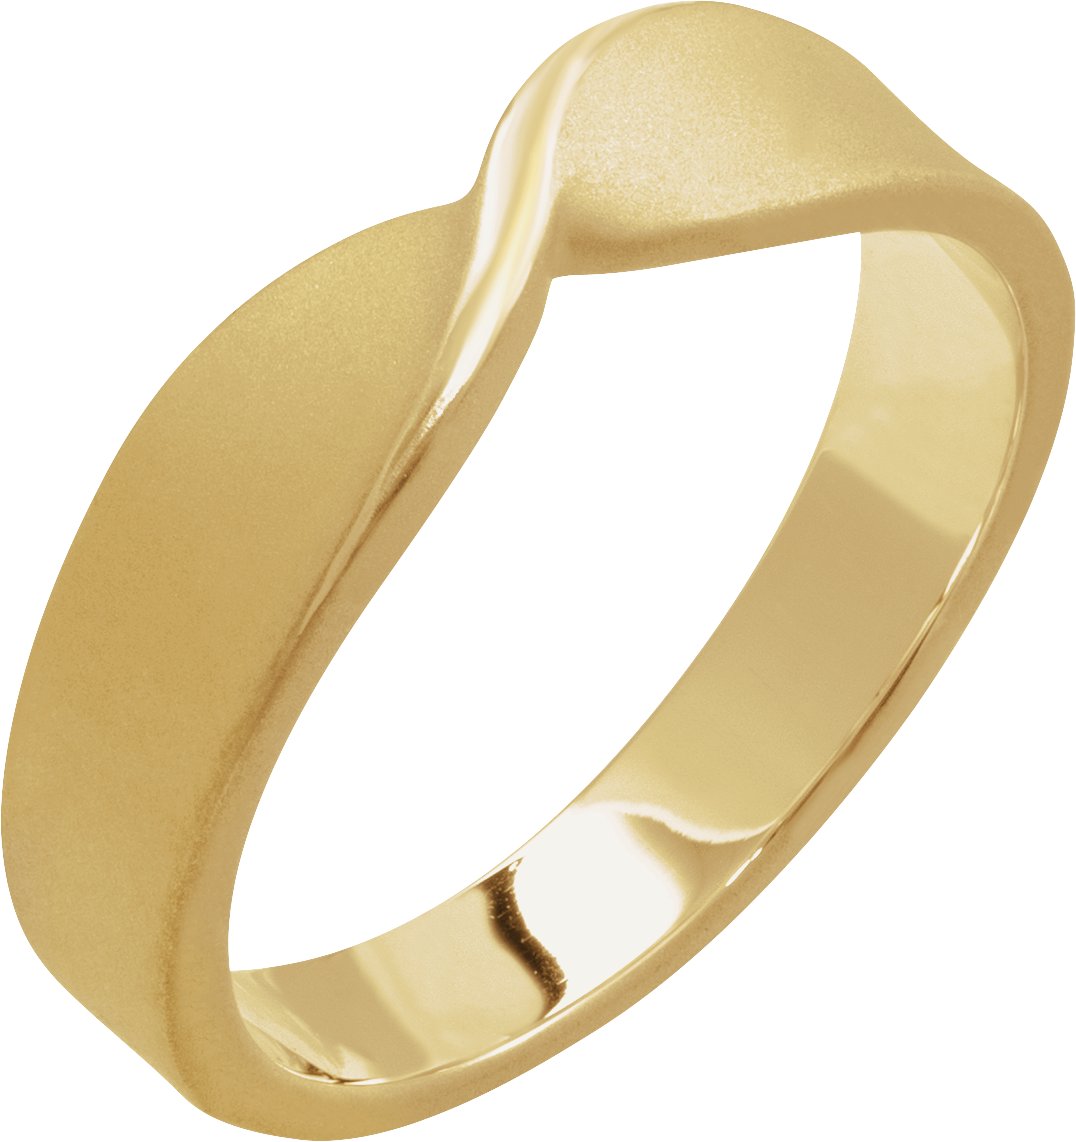 14K Yellow 5 mm Stackable Twisted Ring